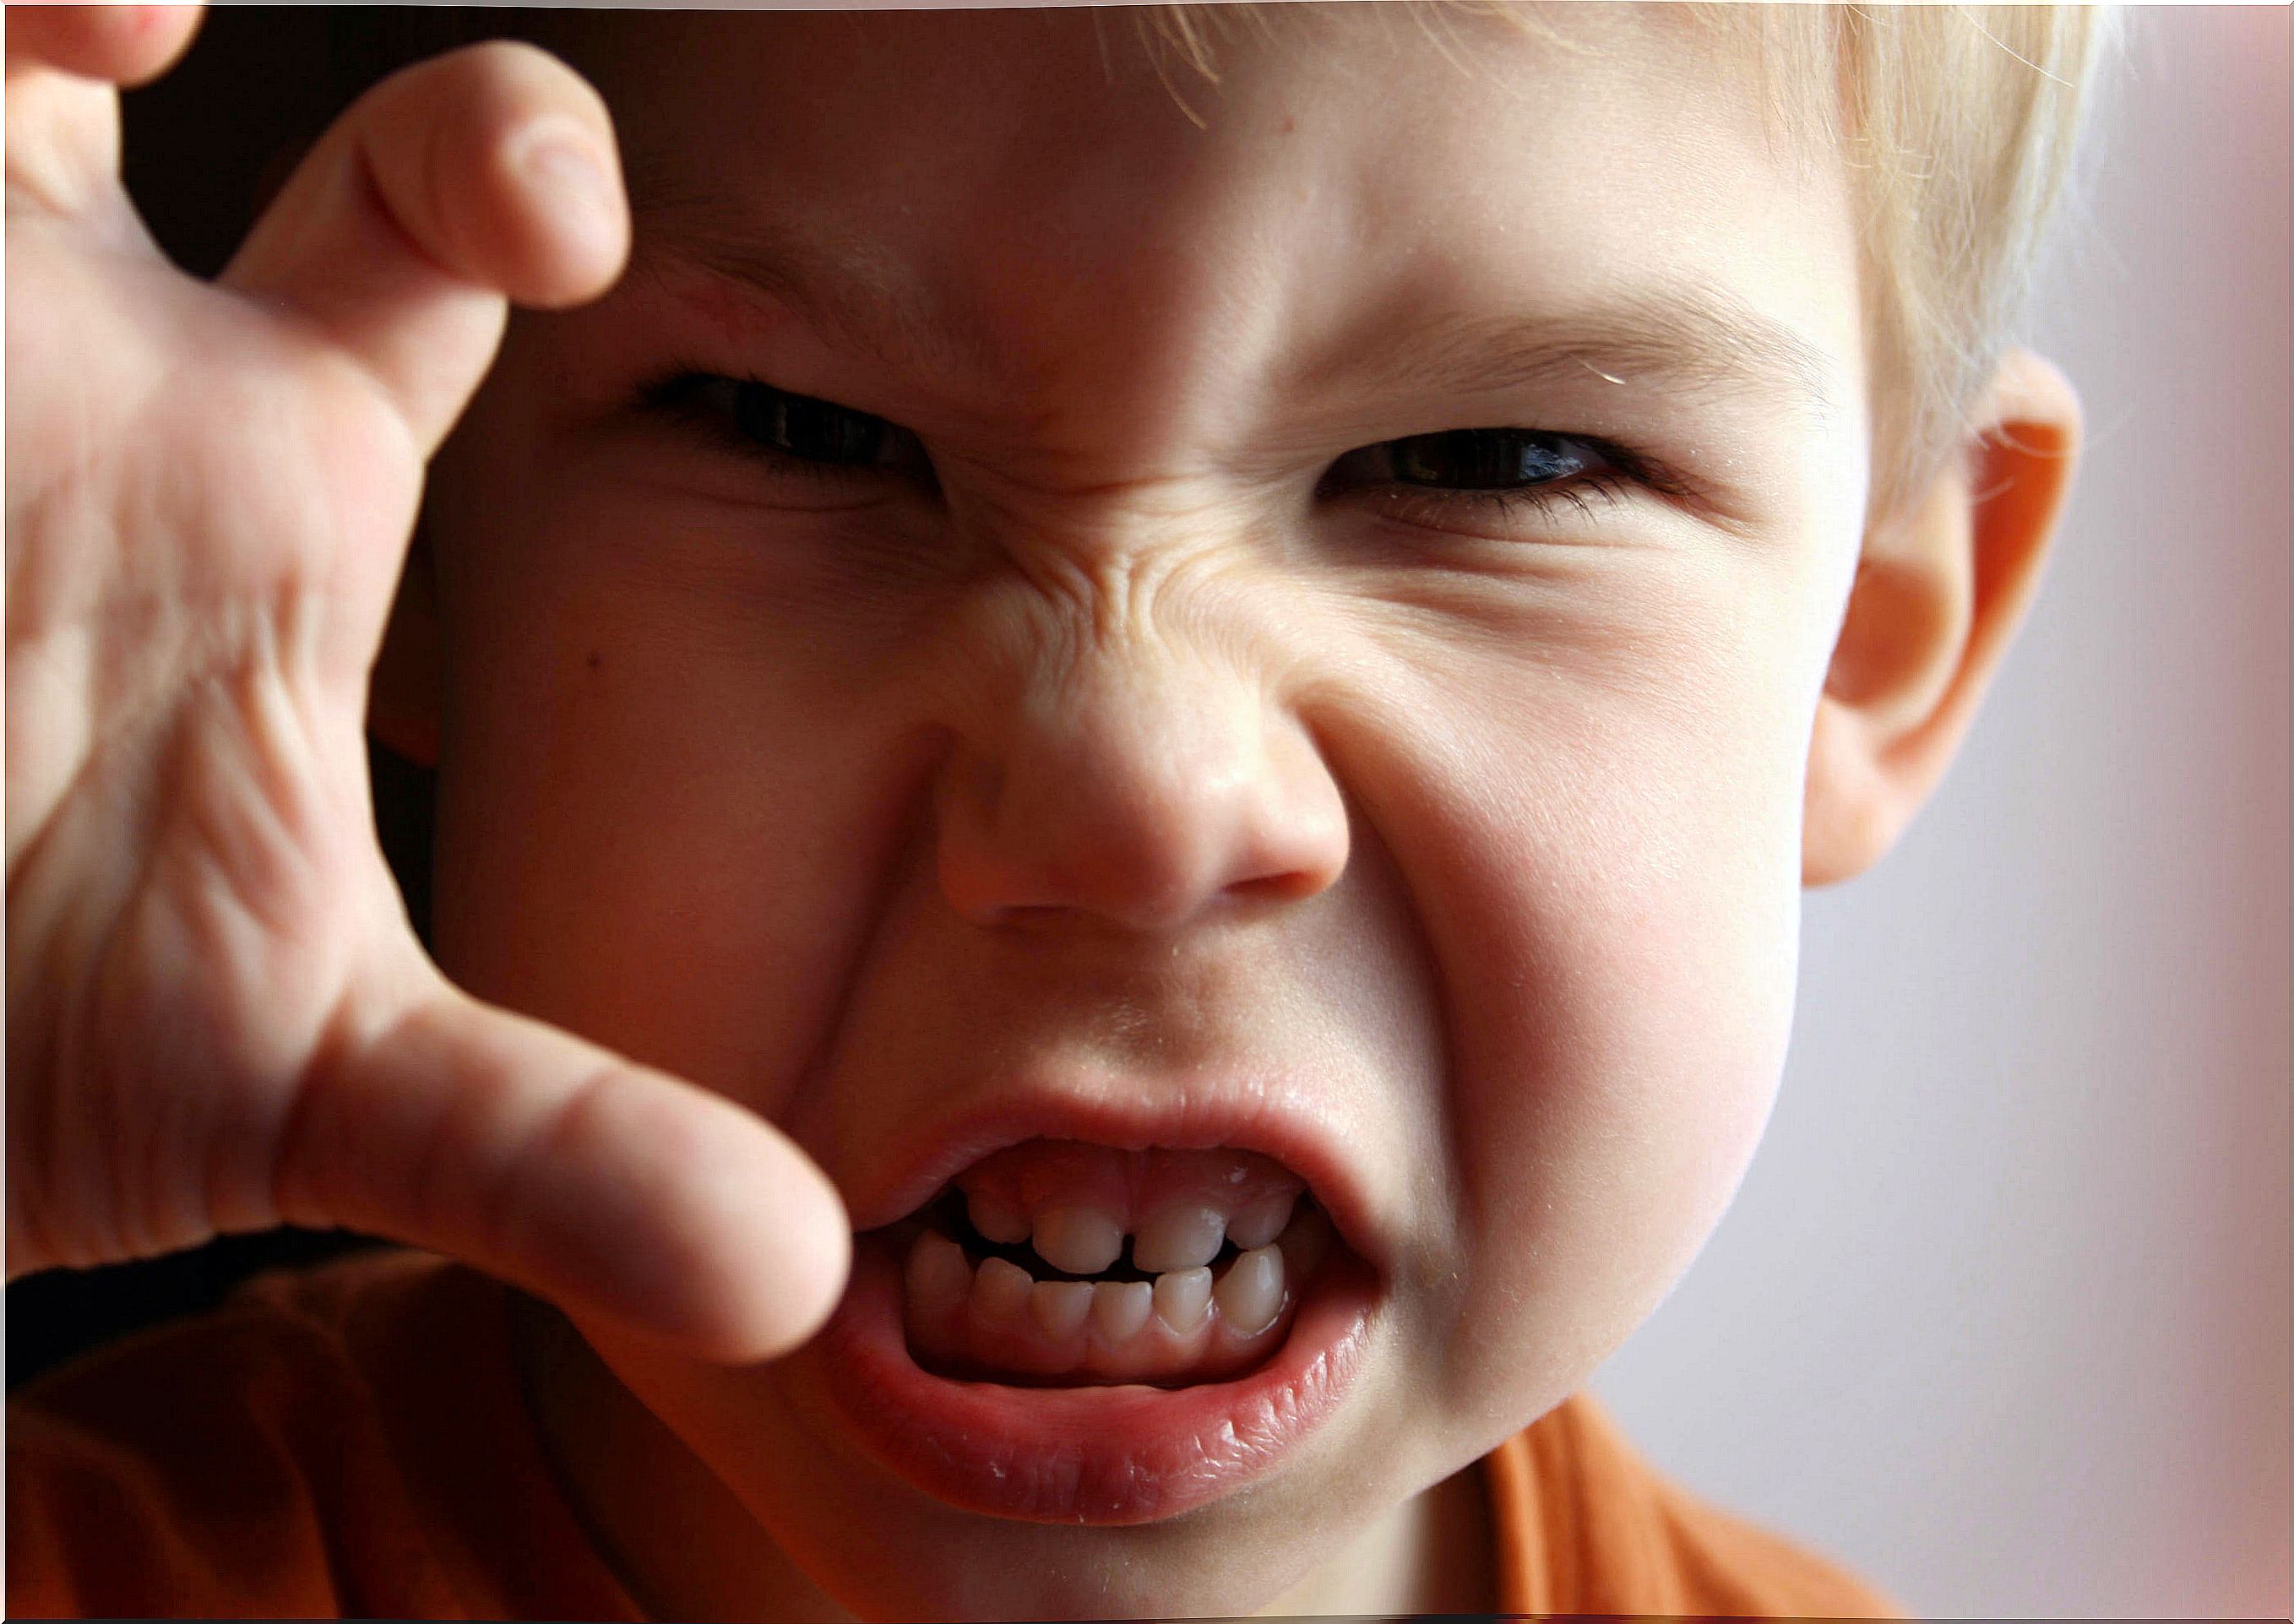 How to deal with anger in children